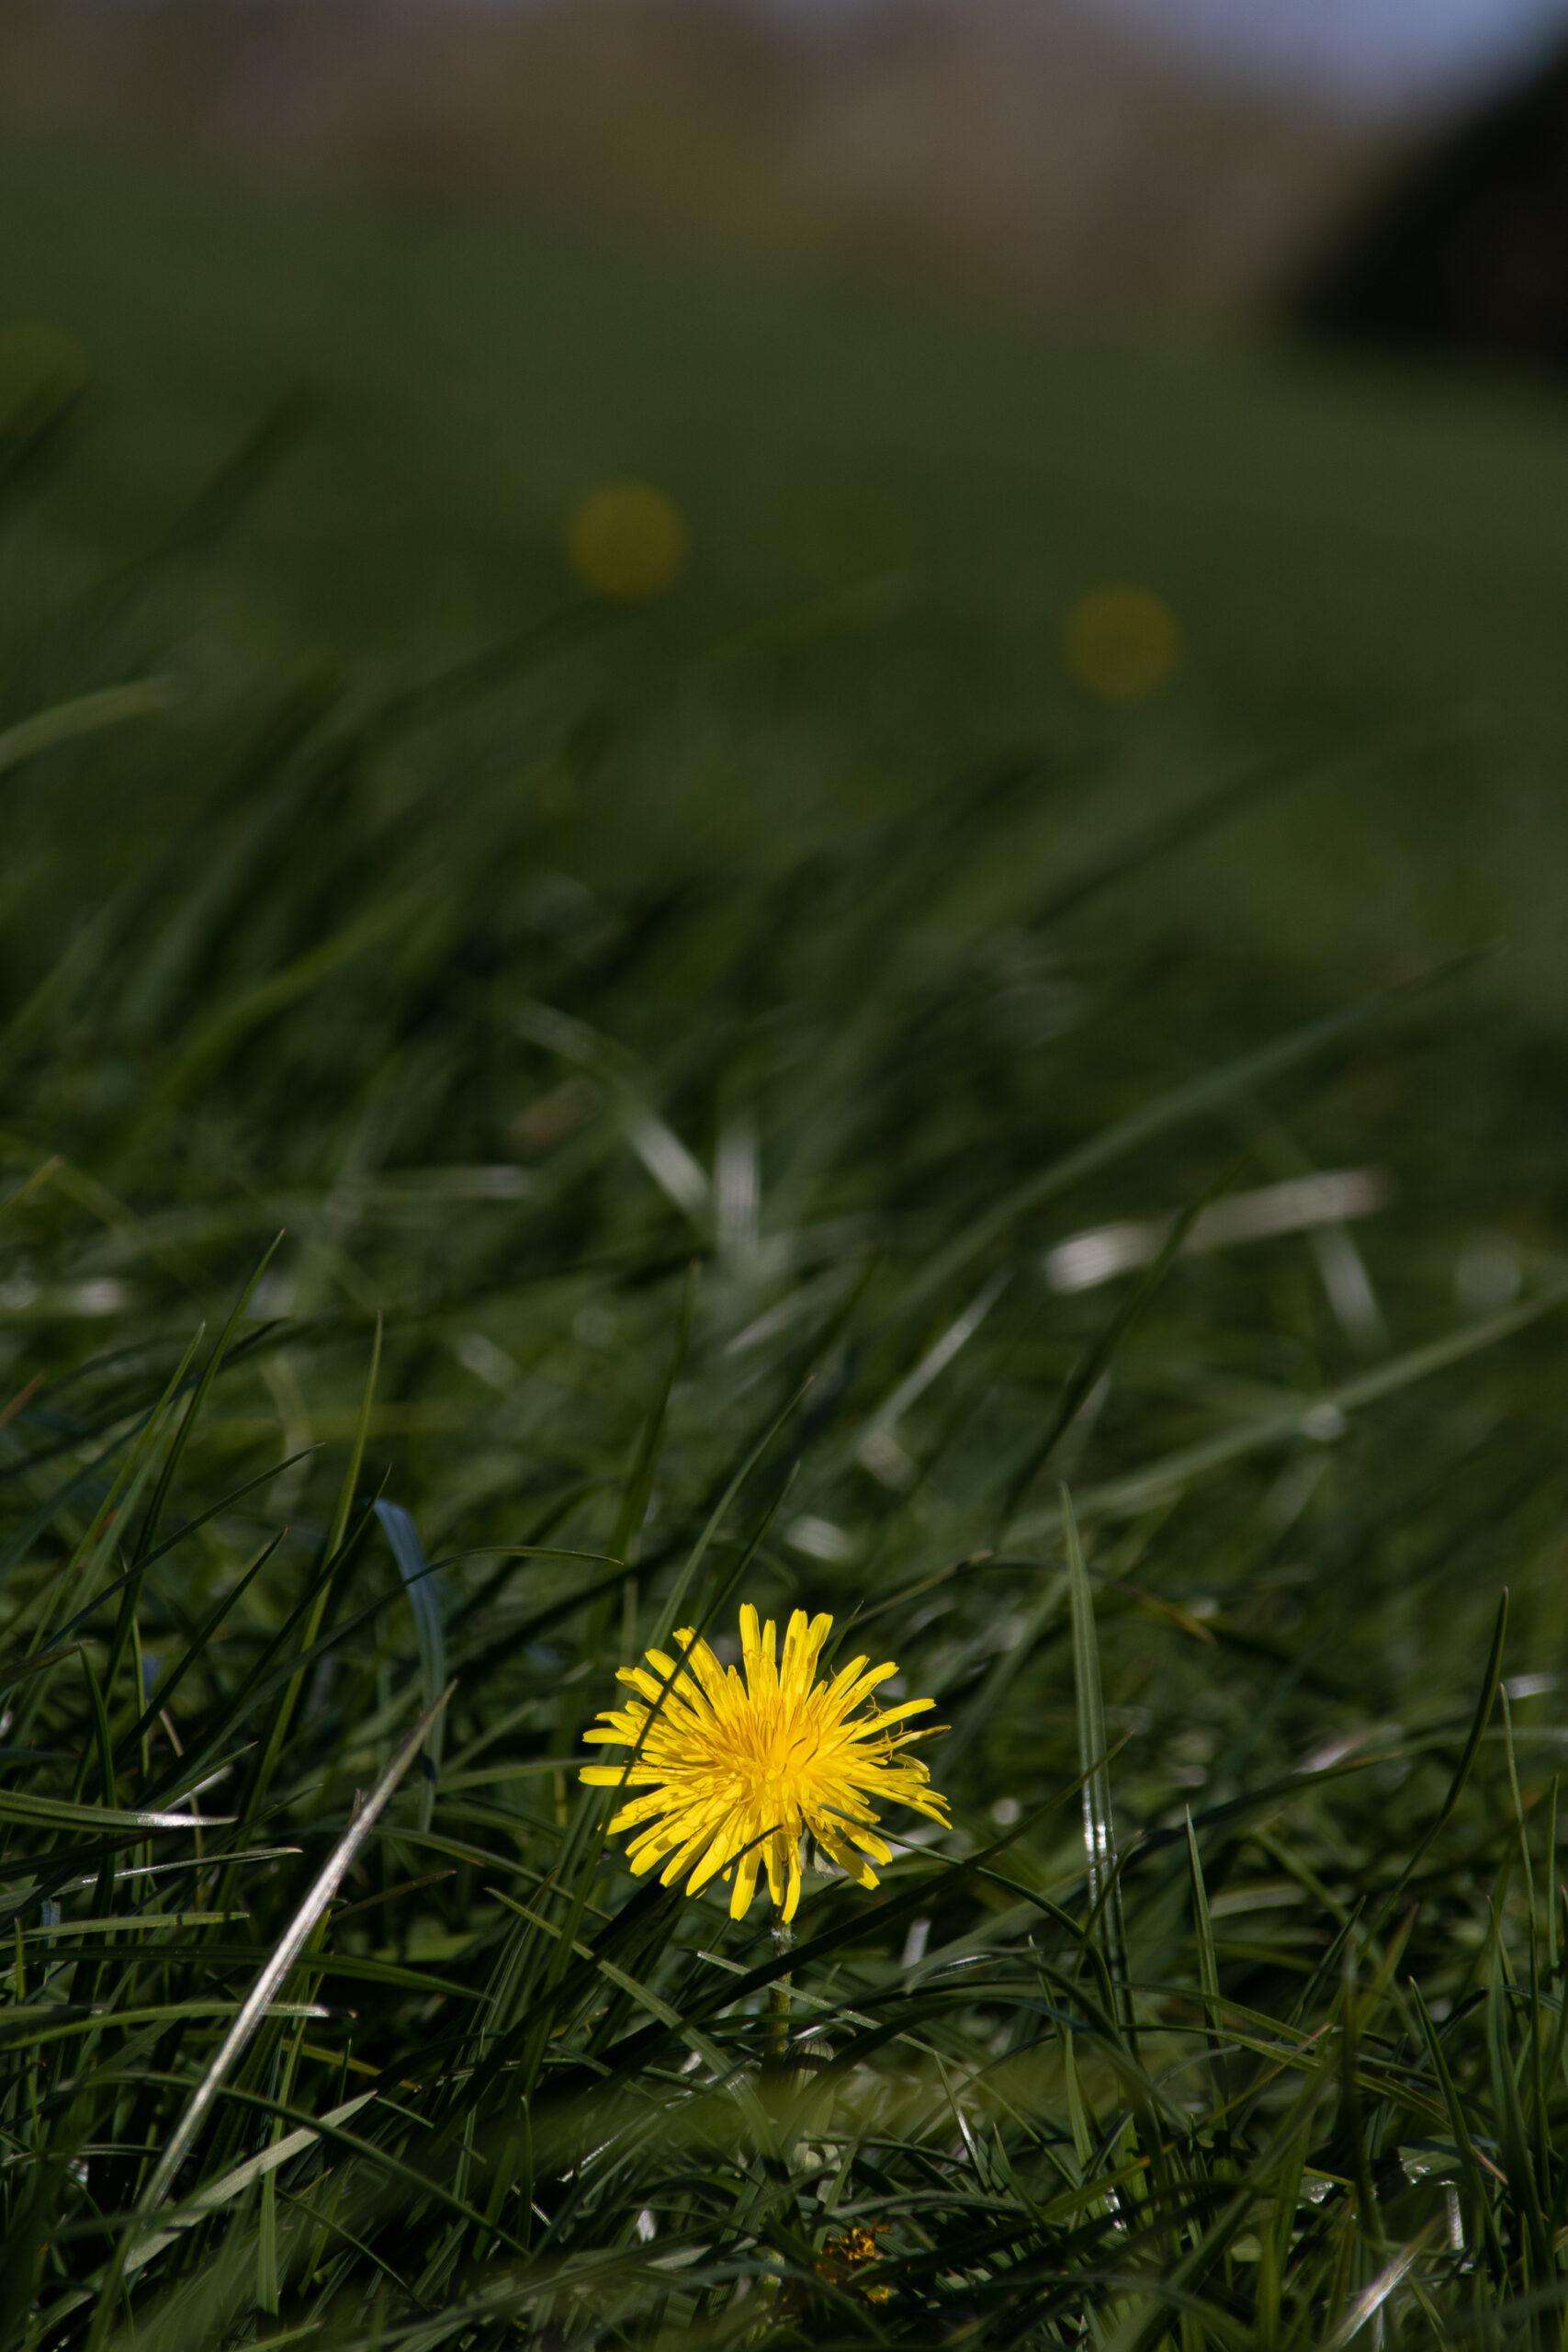 A yellow dandelion in the foreground and blurred out daisies in the background on green grass